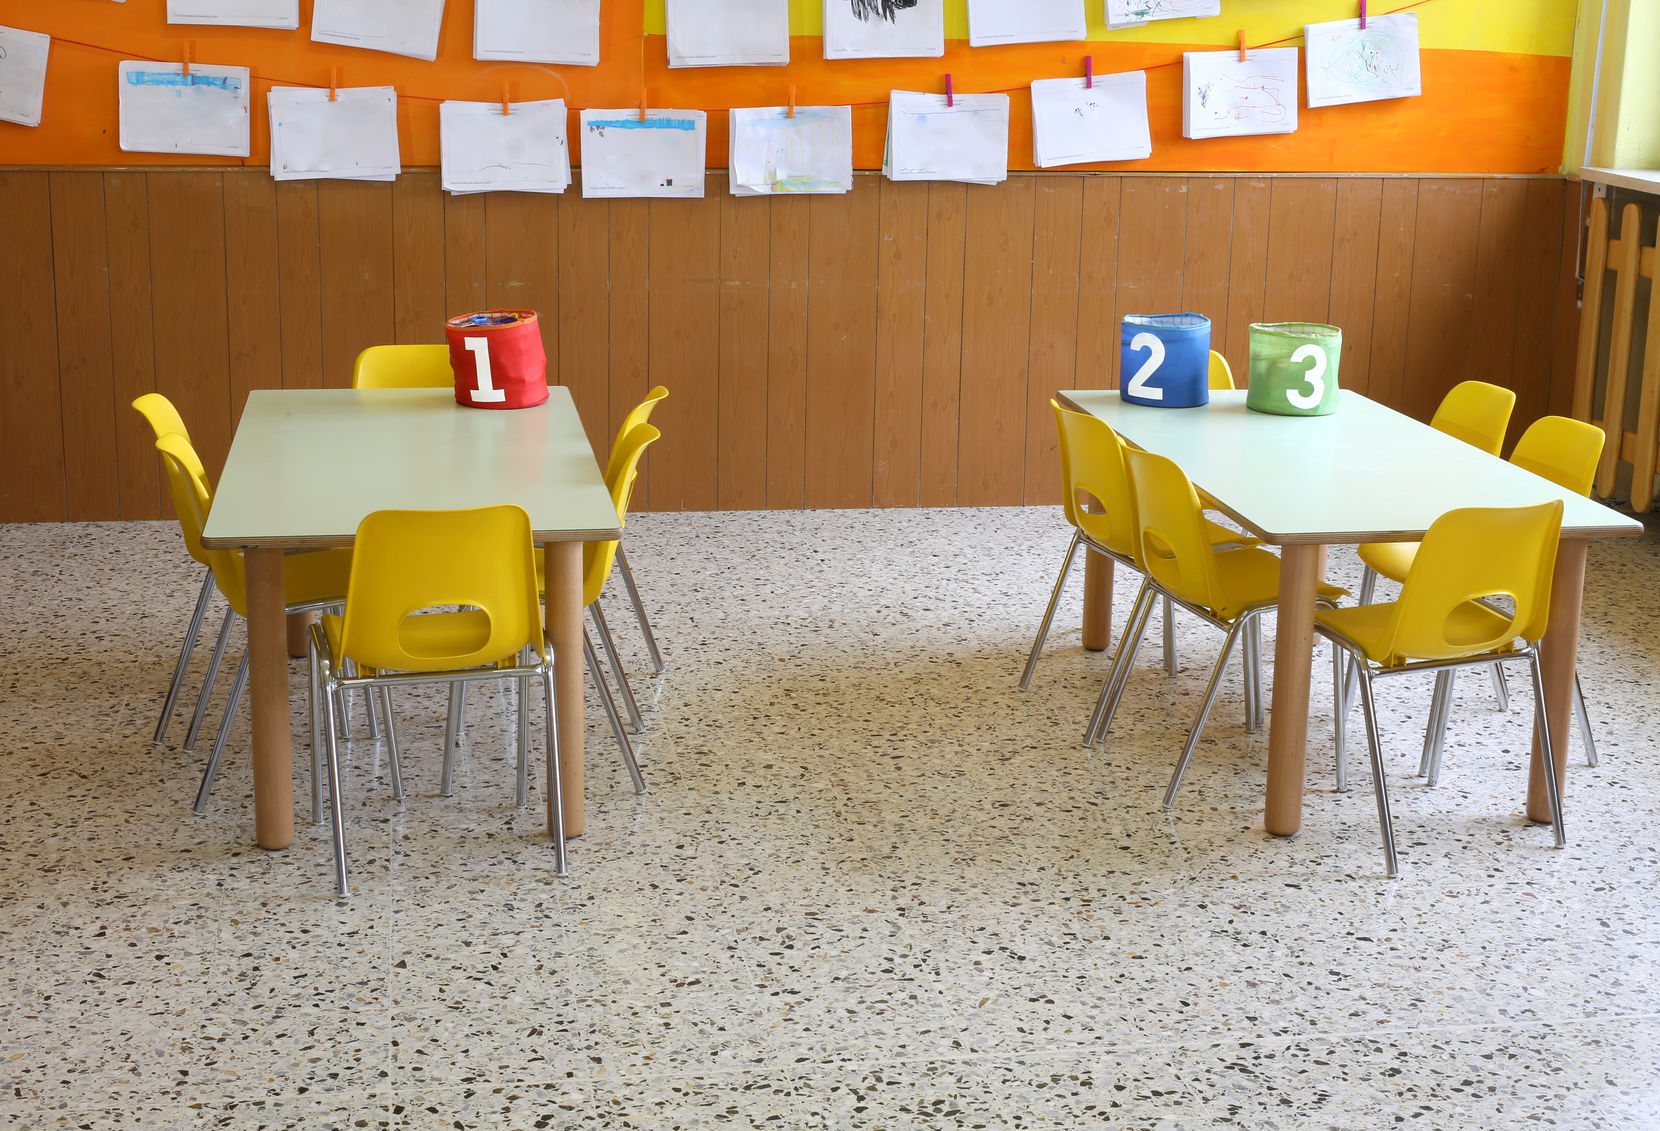 56045682 - kindergarten classroom with the yellow chairs and many children's drawings on the walls